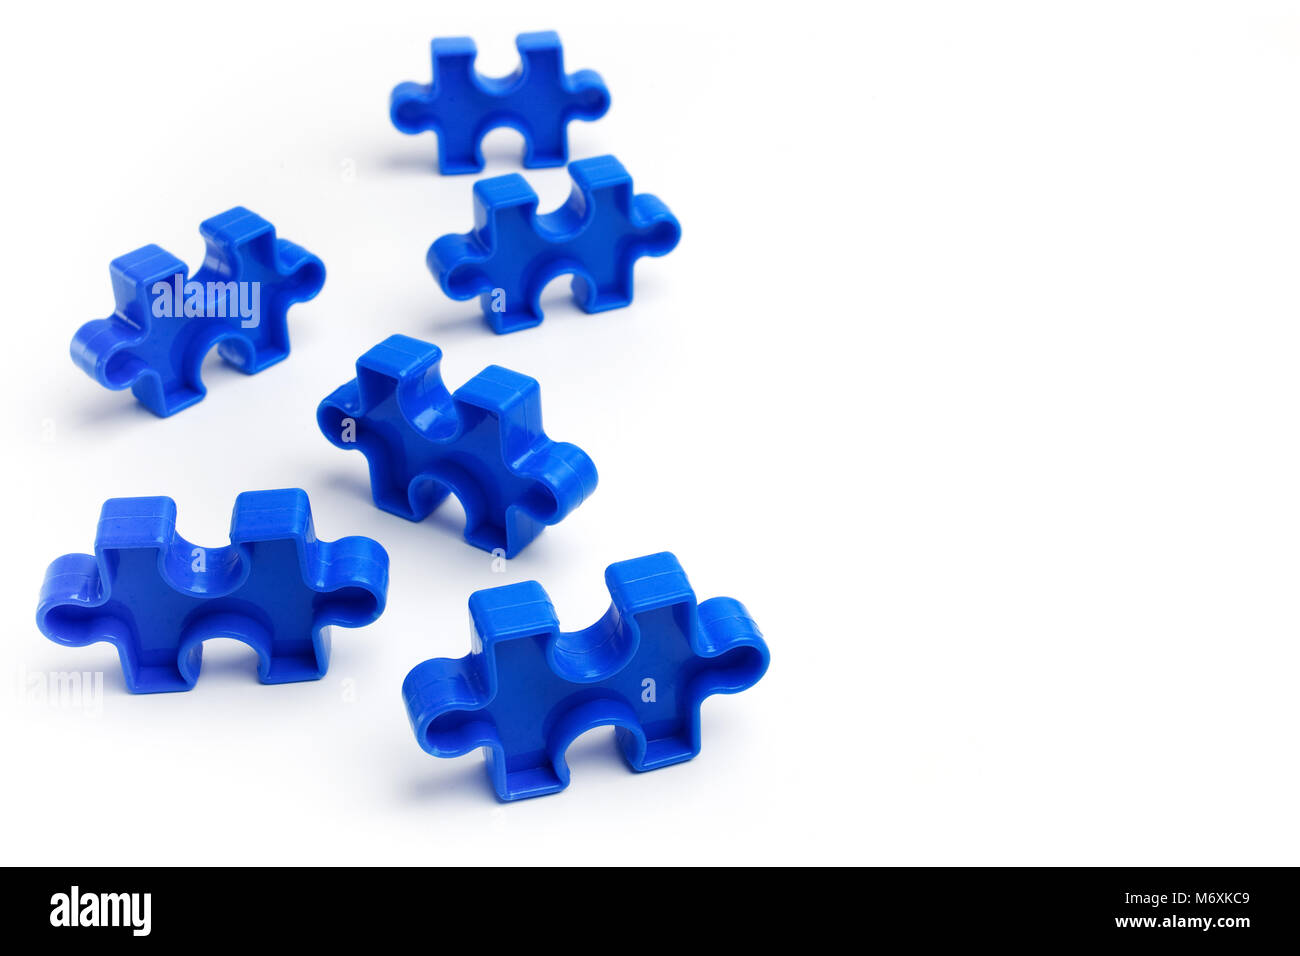 Pieces from a colorful jigsaw puzzle on white background. Break barriers together for autism. Stock Photo